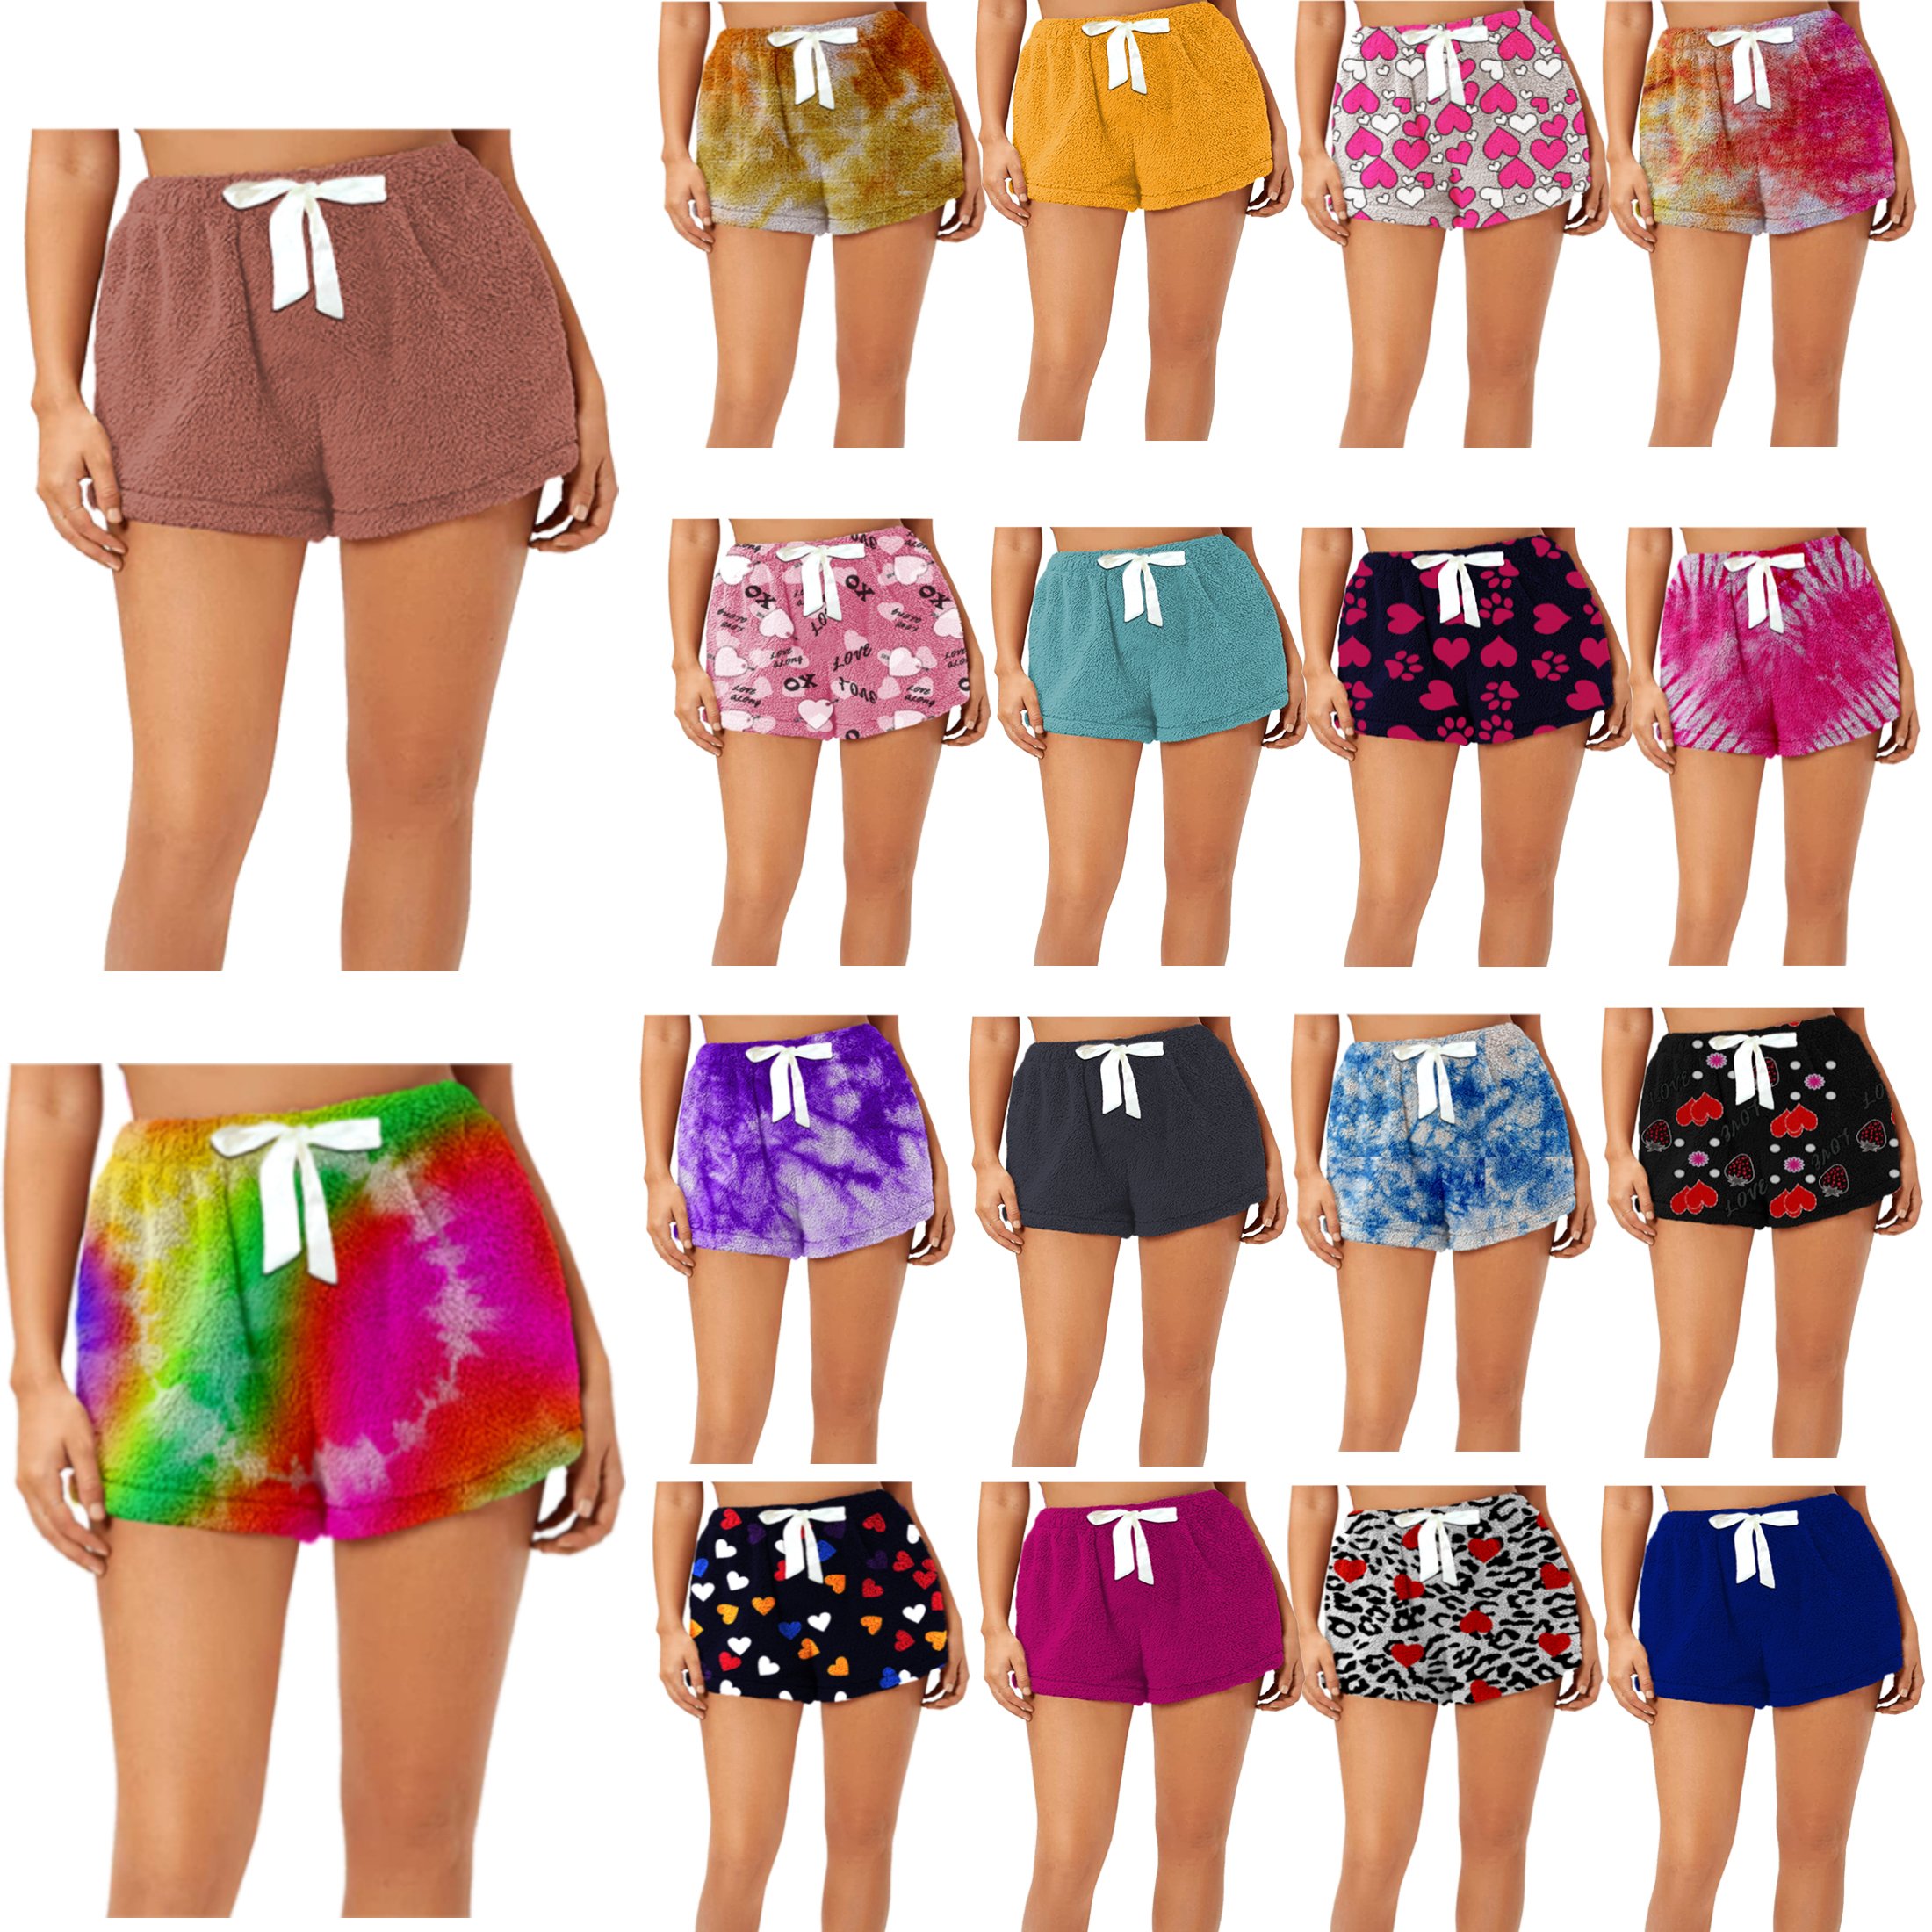 5-Pack: Women's Super Soft Micro Fleece Ultra Plush Pajama Shorts - Solid,TieDye,Solid, Large